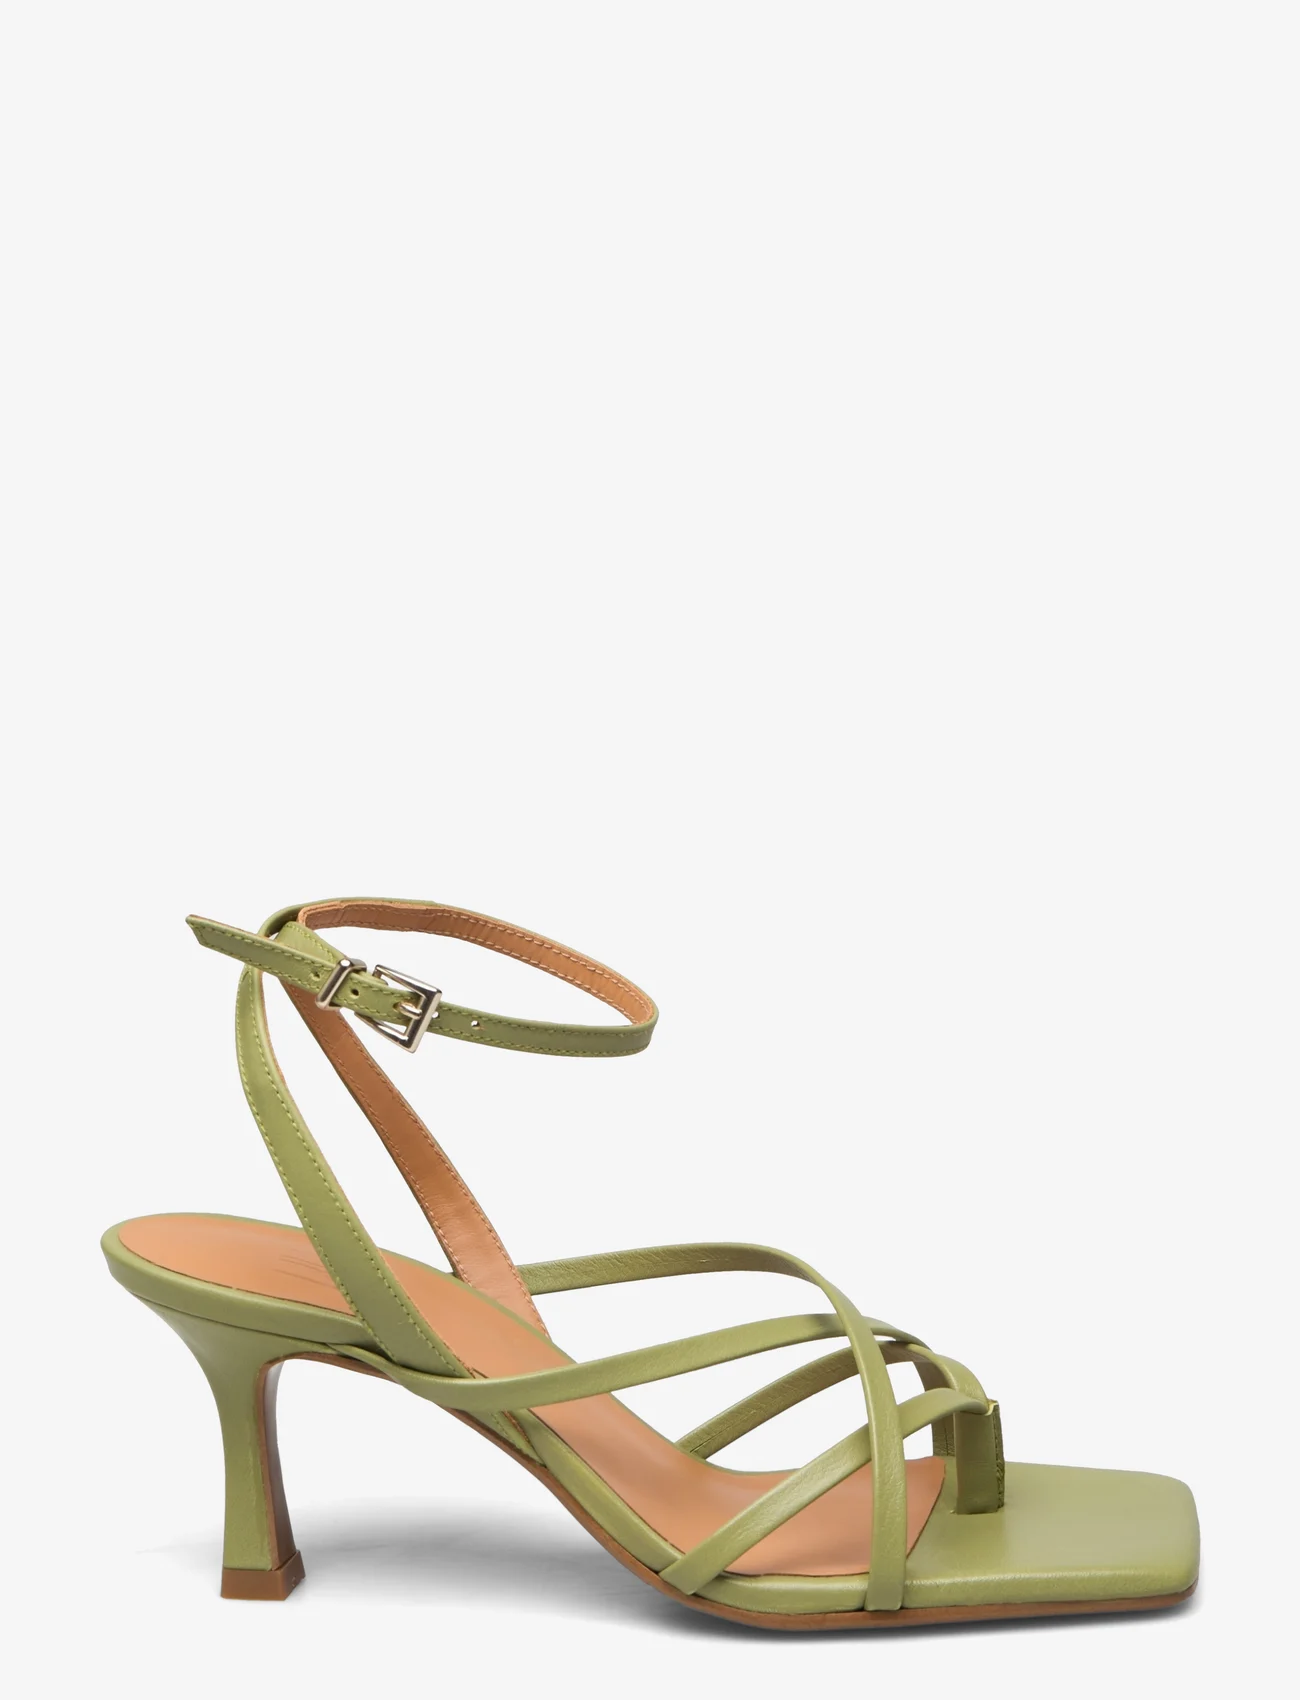 Billi Bi - Sandals - party wear at outlet prices - bamboo green nappa - 1